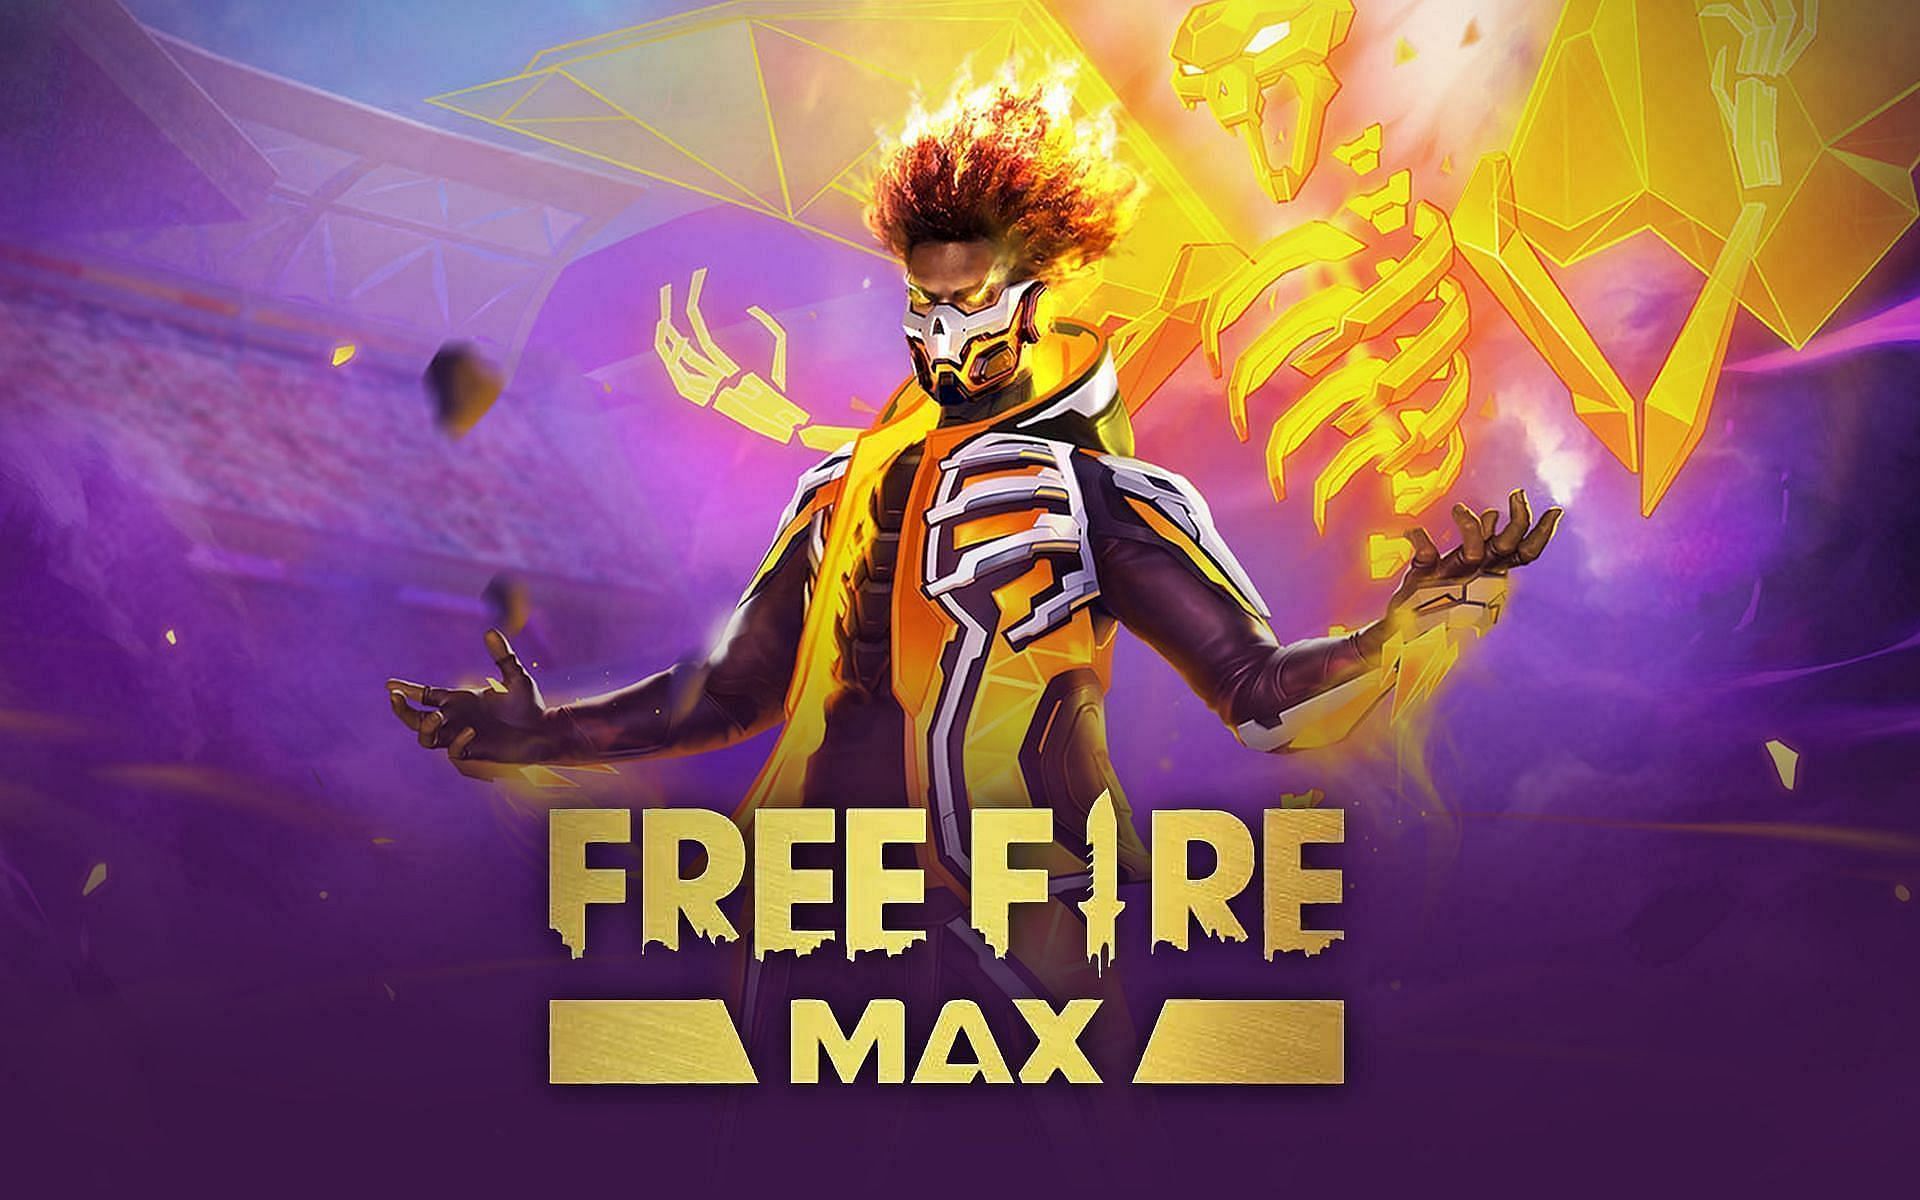 Free Fire MAX is still available in the Google Play Store (Image via Sportskeeda)